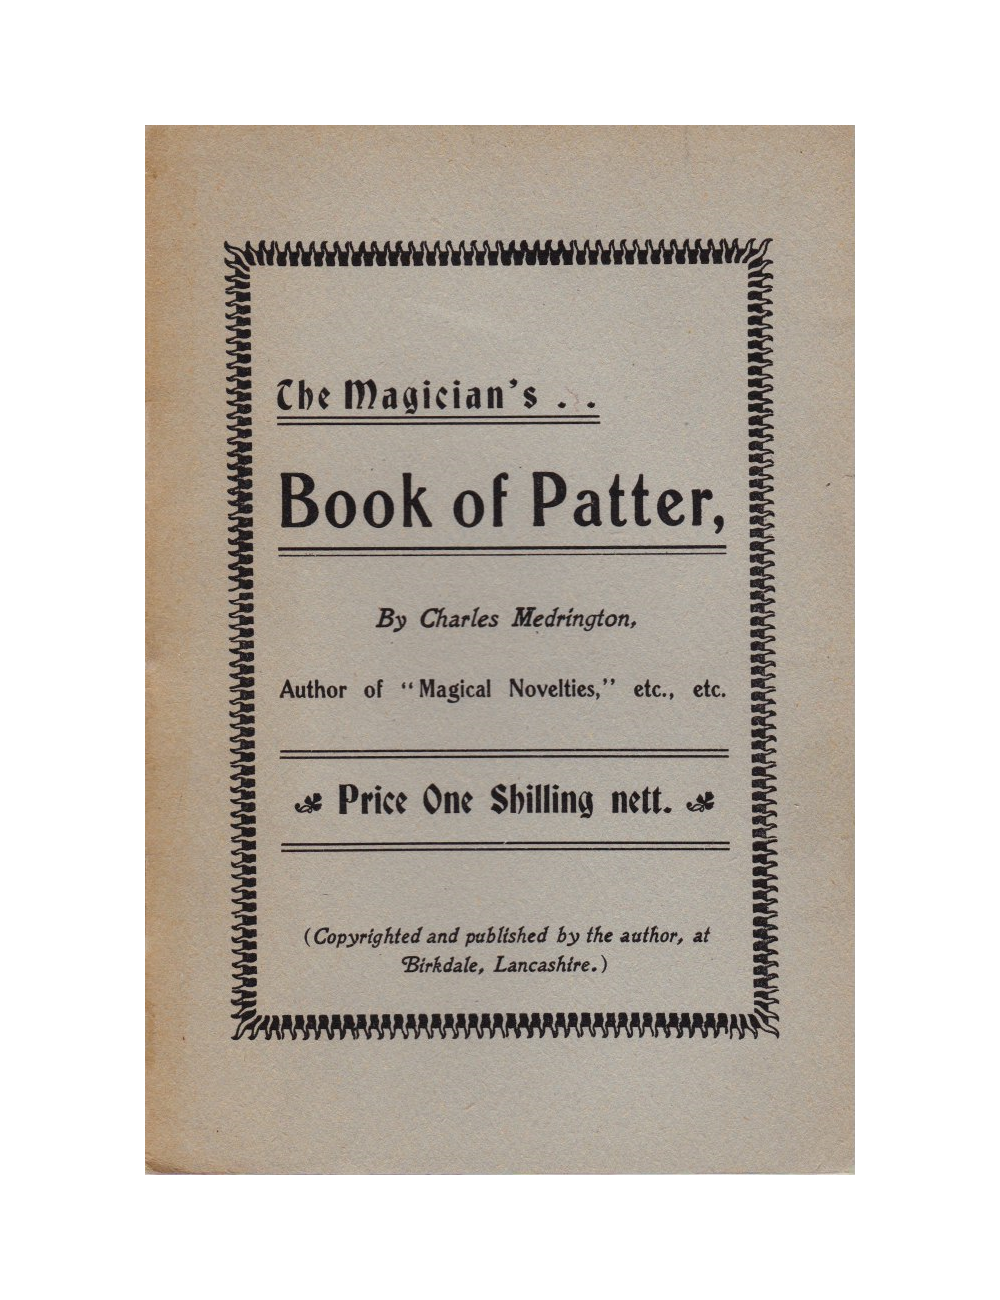 THE MAGICIAN'S BOOK OF PATTER BY CHARLES MEDRINGTON